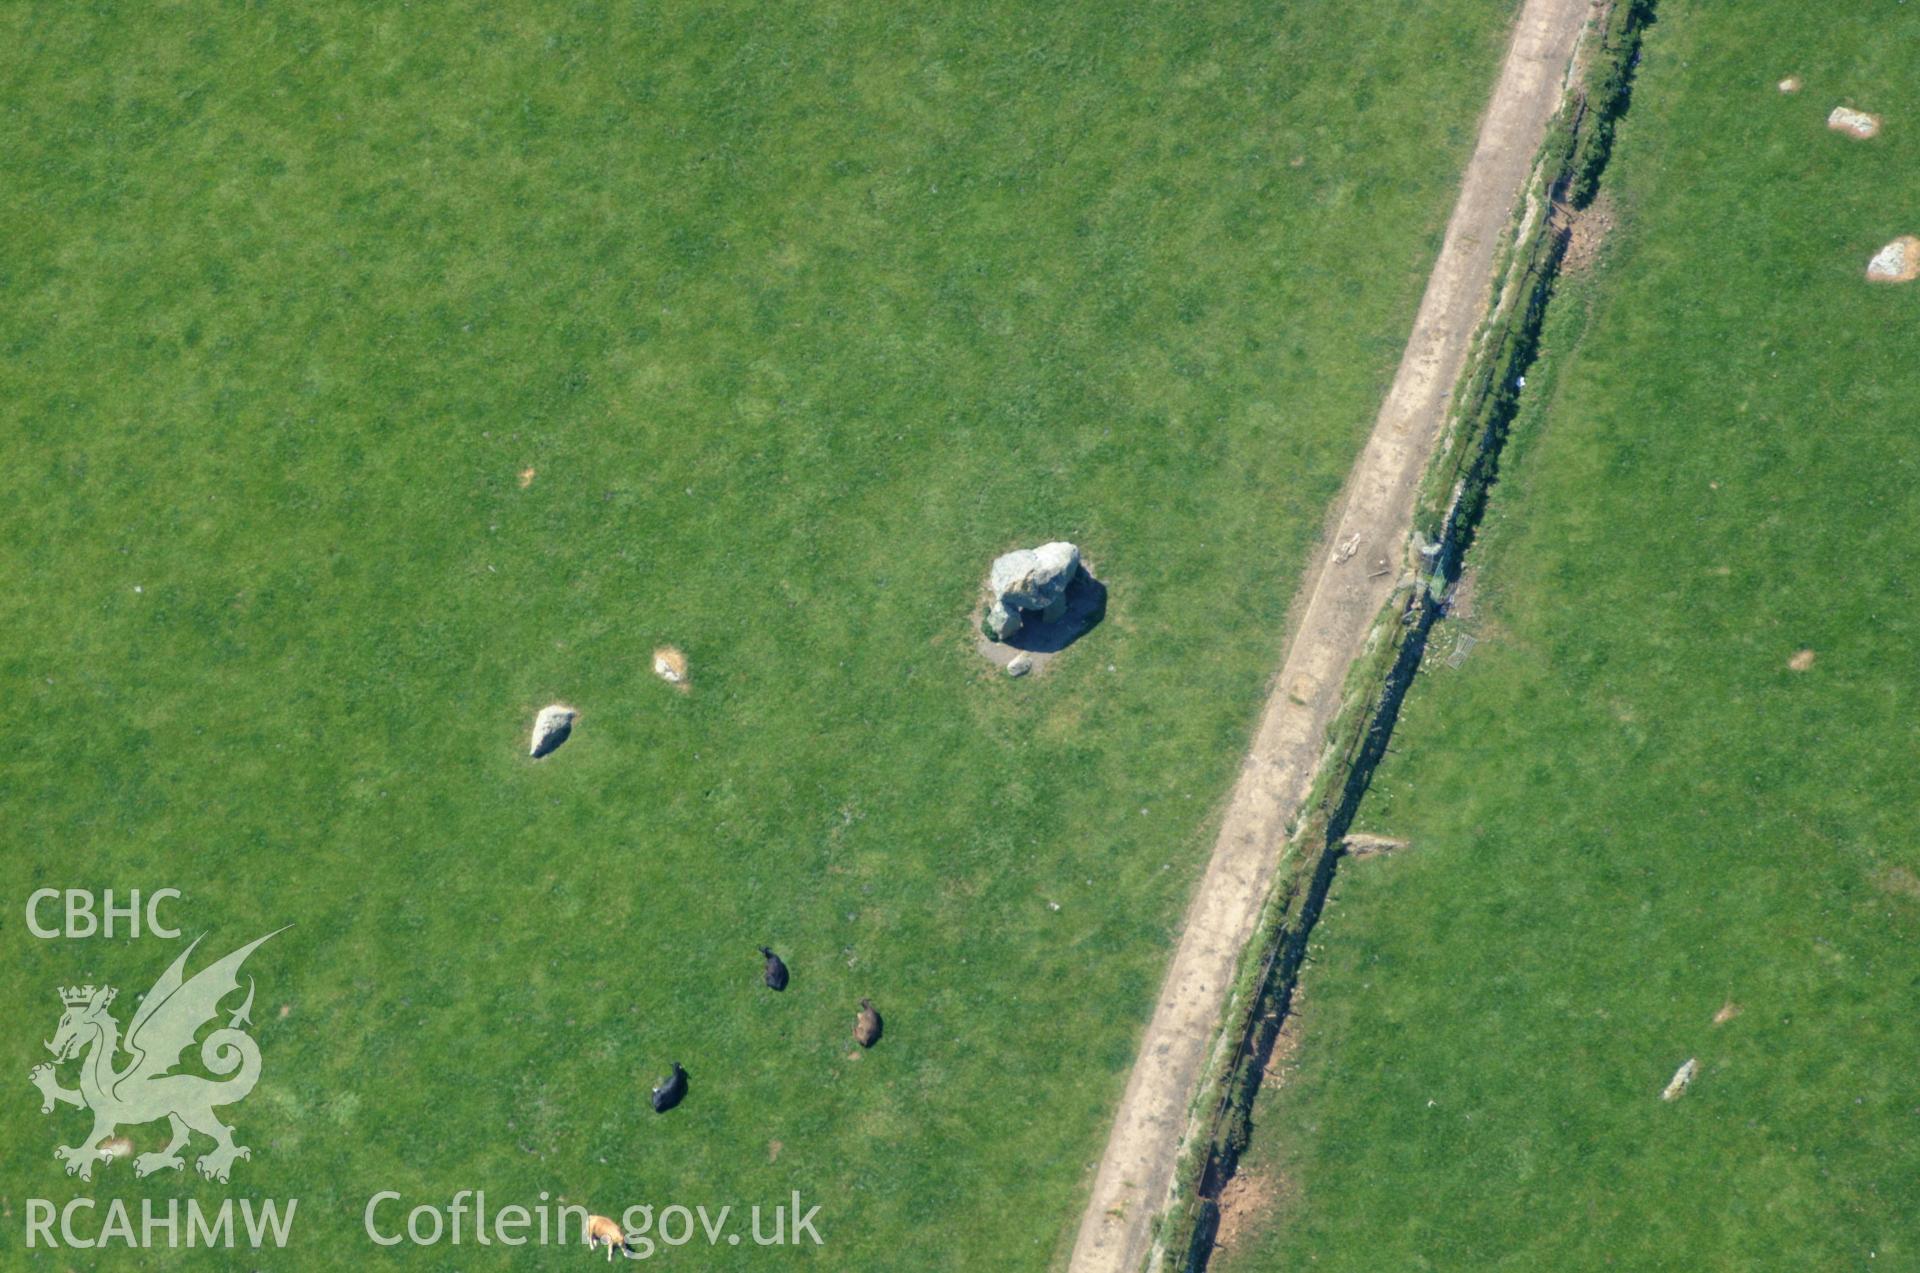 RCAHMW colour oblique aerial photograph of Carreg Samson Burial Chamber taken on 25/05/2004 by Toby Driver